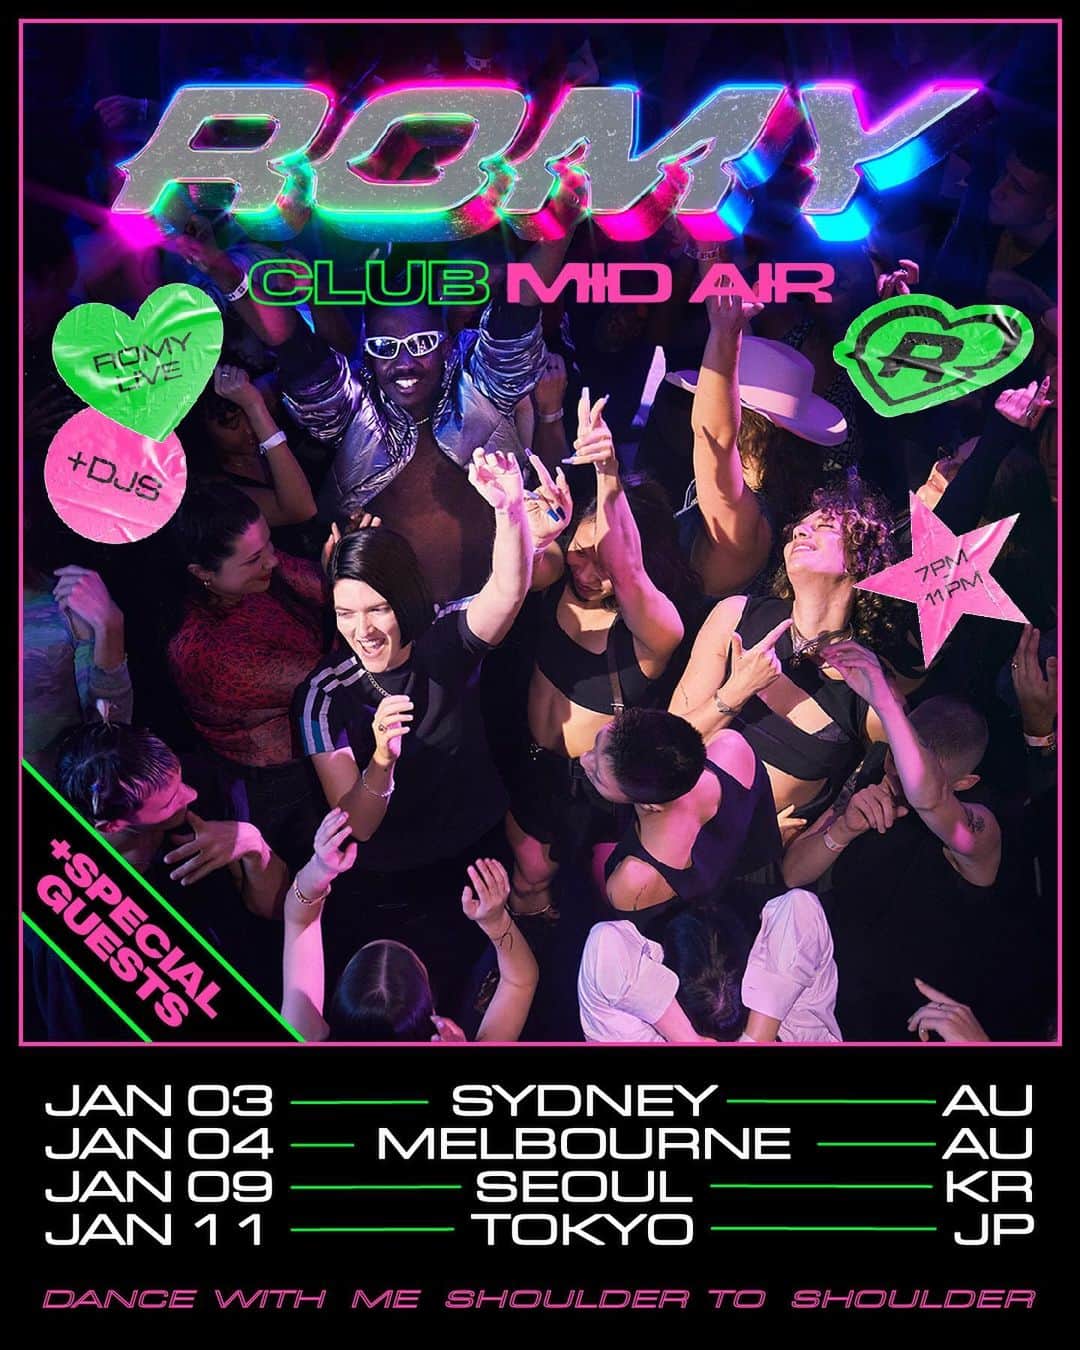 The xxのインスタグラム：「@romyromyromy is bringing Club Mid Air to Australia and Asia   Register for pre-sale via www.romyromyromy.com Be sure to enter your location when you register to ensure you receive the pre-sale email   Pre-sale opens on Tuesday 17th October 10AM local time  General on sale* opens Wednesday 18th October 10AM local time  *The general on sale for Tokyo opens Saturday 4th November 10 AM local time」